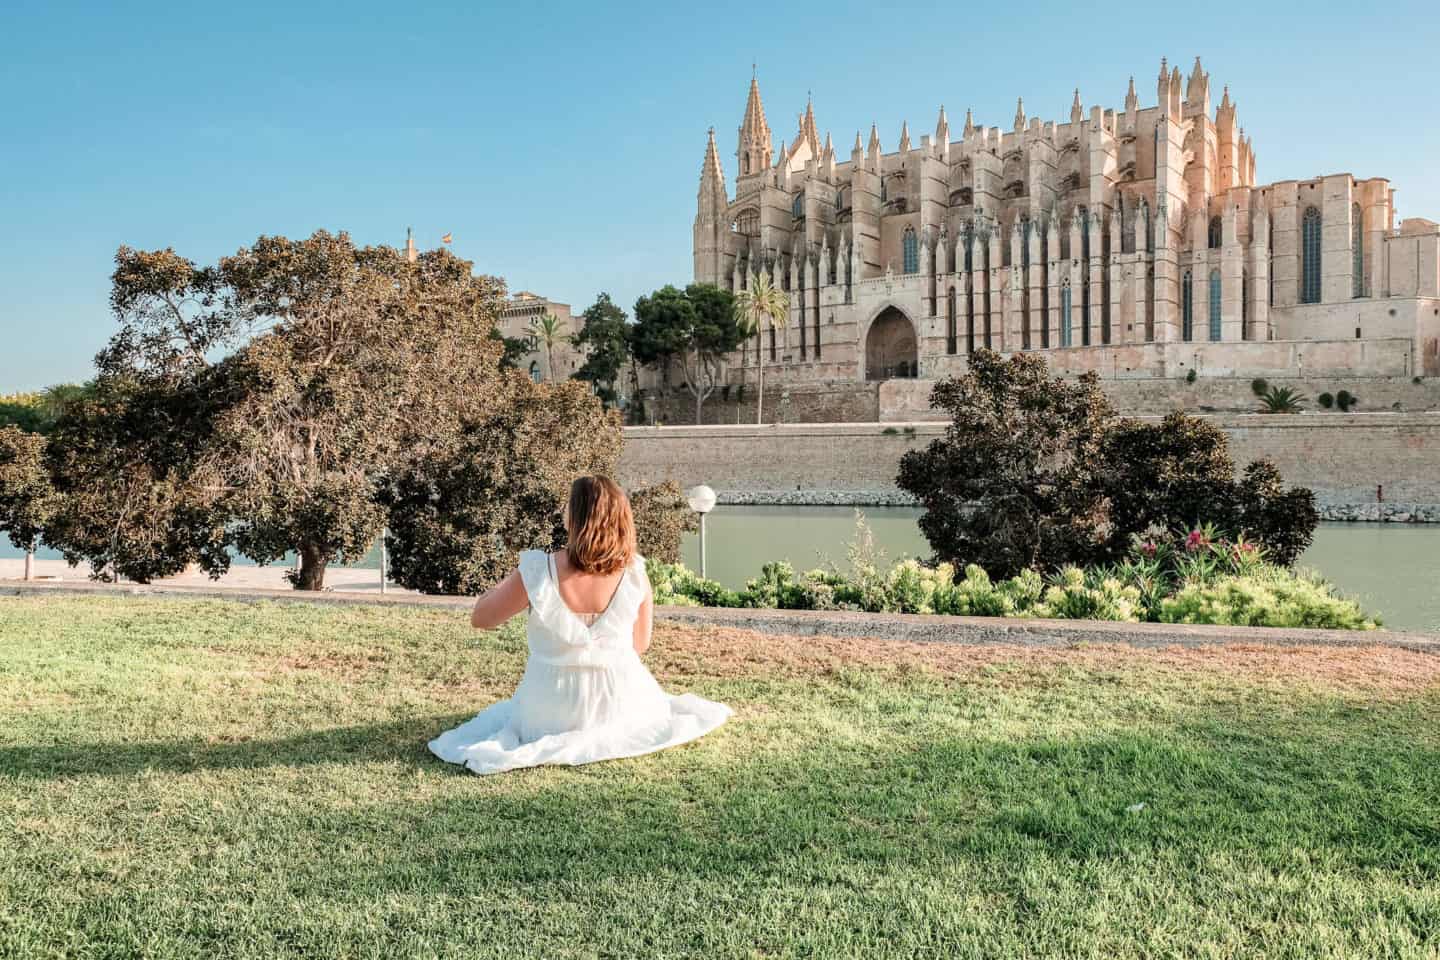 An independent traveler enjoys a peaceful moment in Mallorca, sitting on the green grass, gazing at the majestic Cathedral of Santa Maria in the distance, symbolizing the beauty of solo travel.